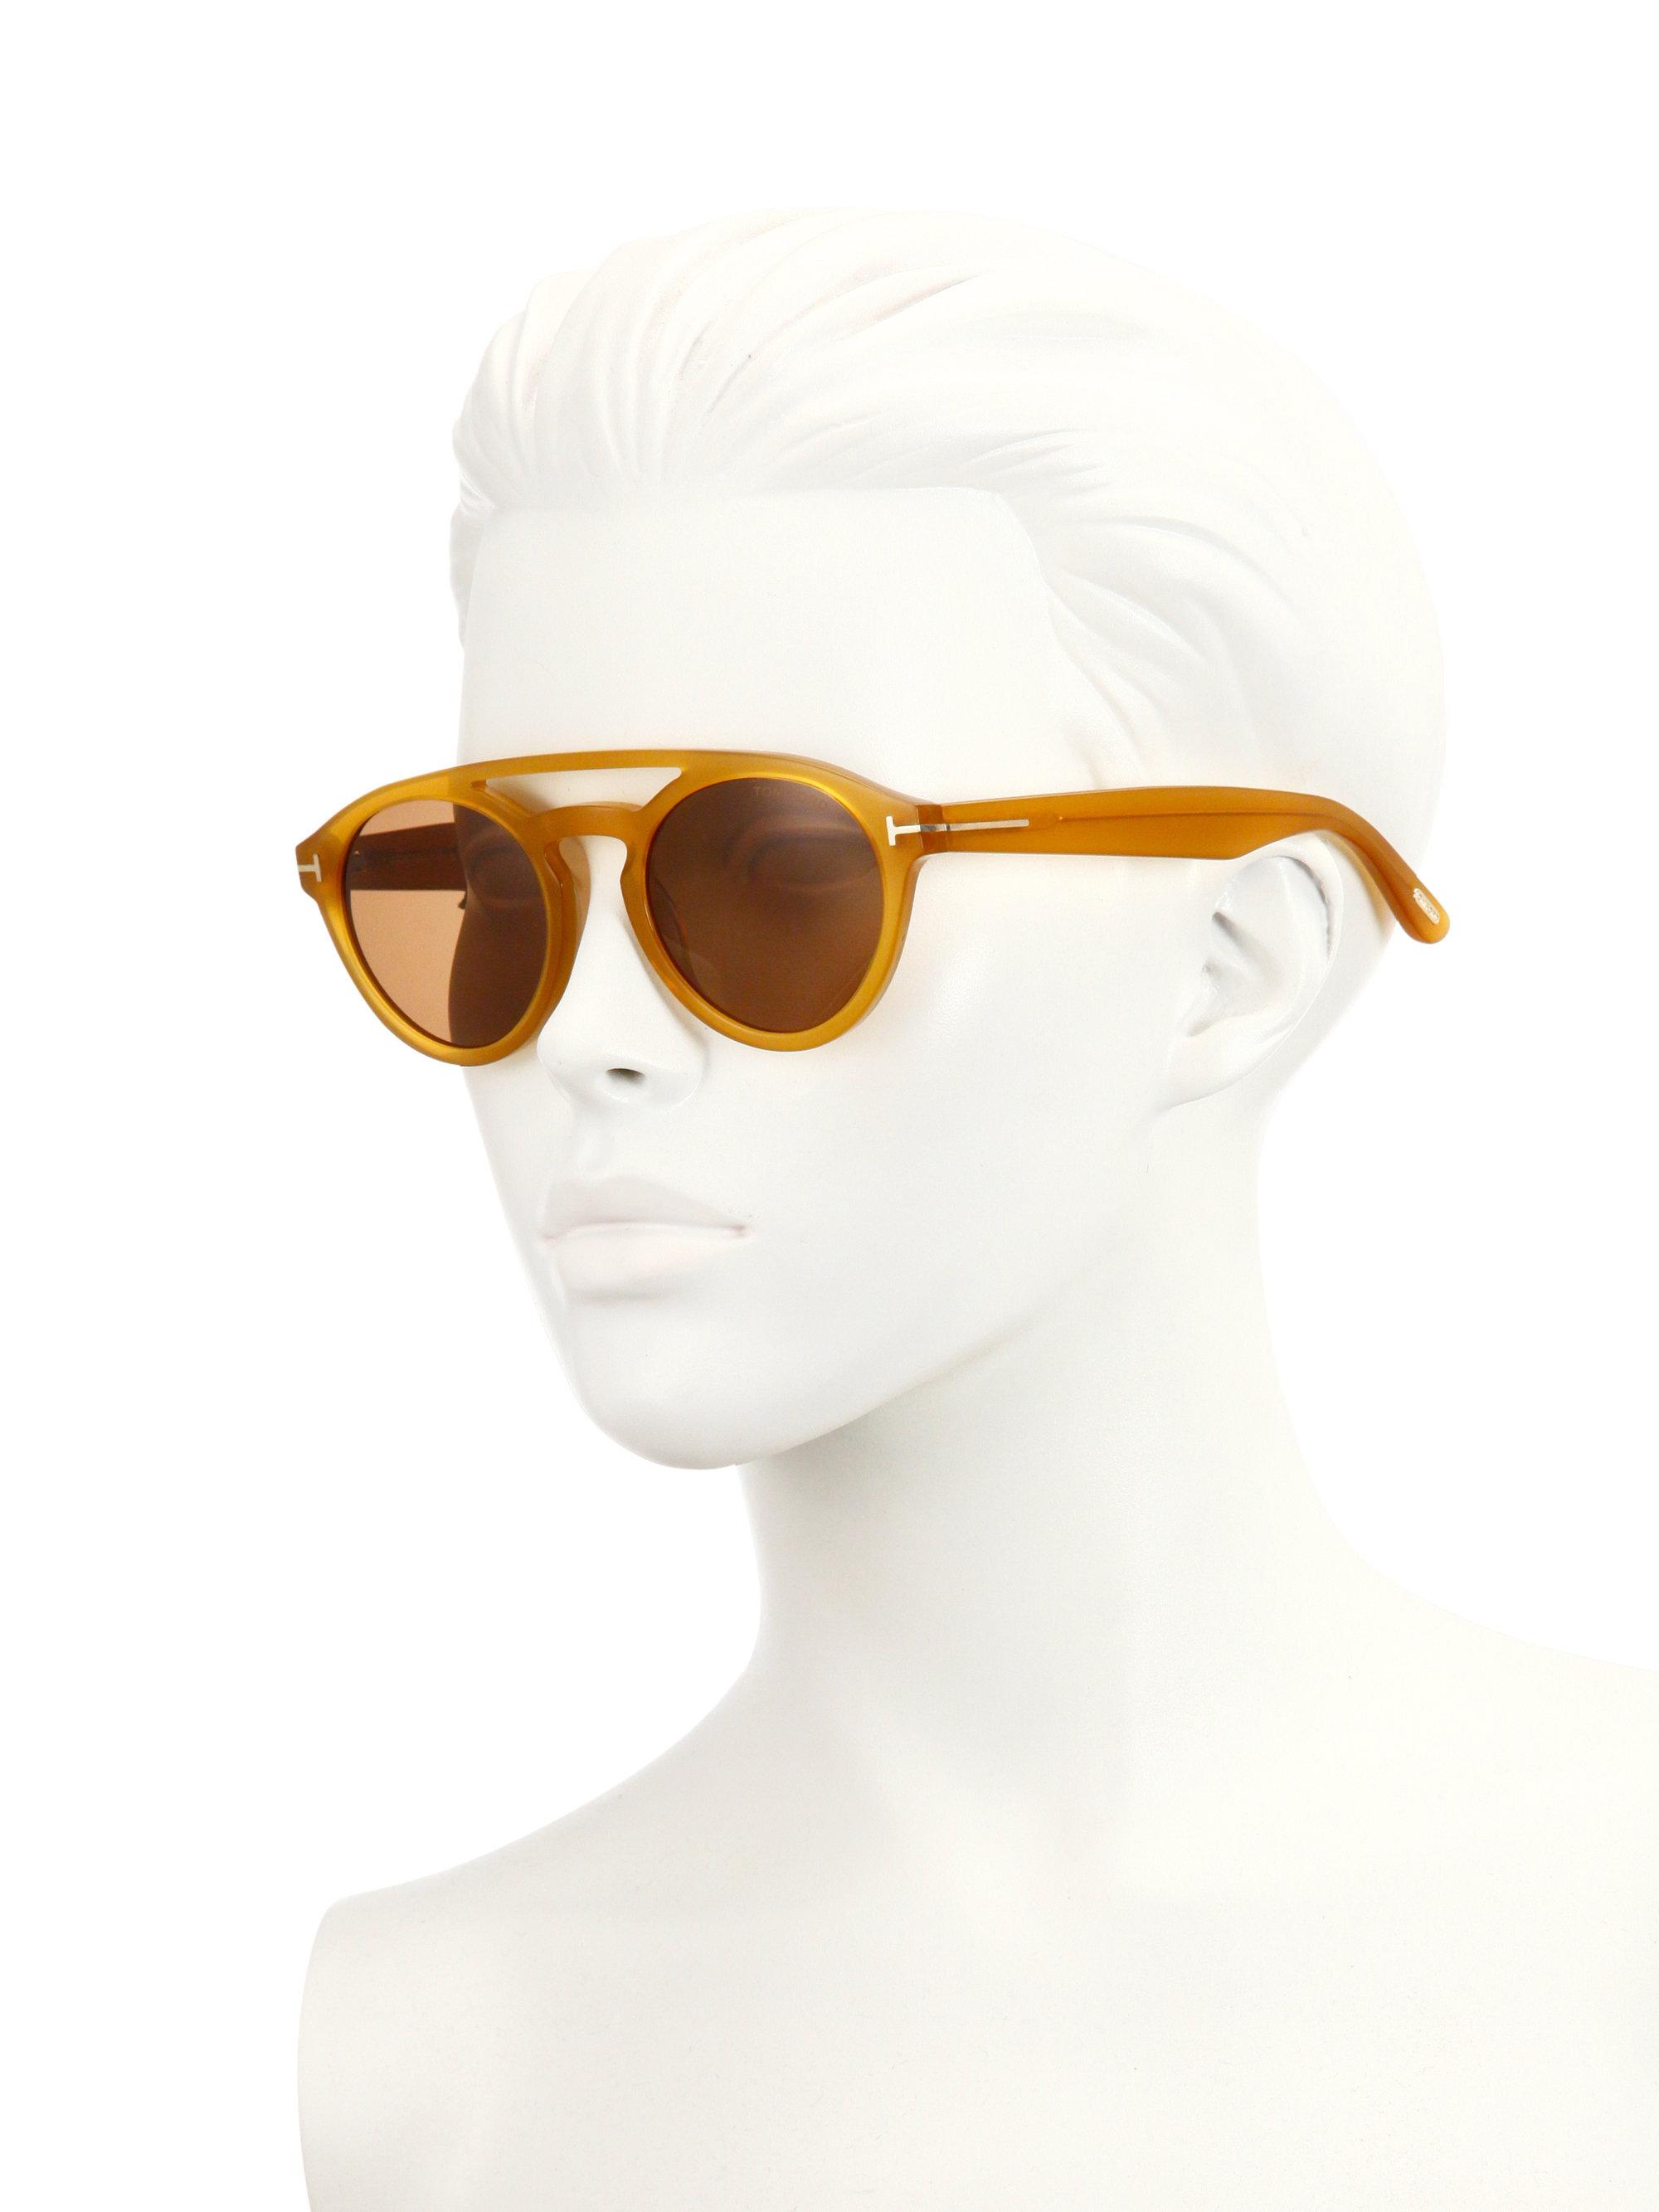 Tom Ford Clint 50mm Round Sunglasses in Yellow | Lyst